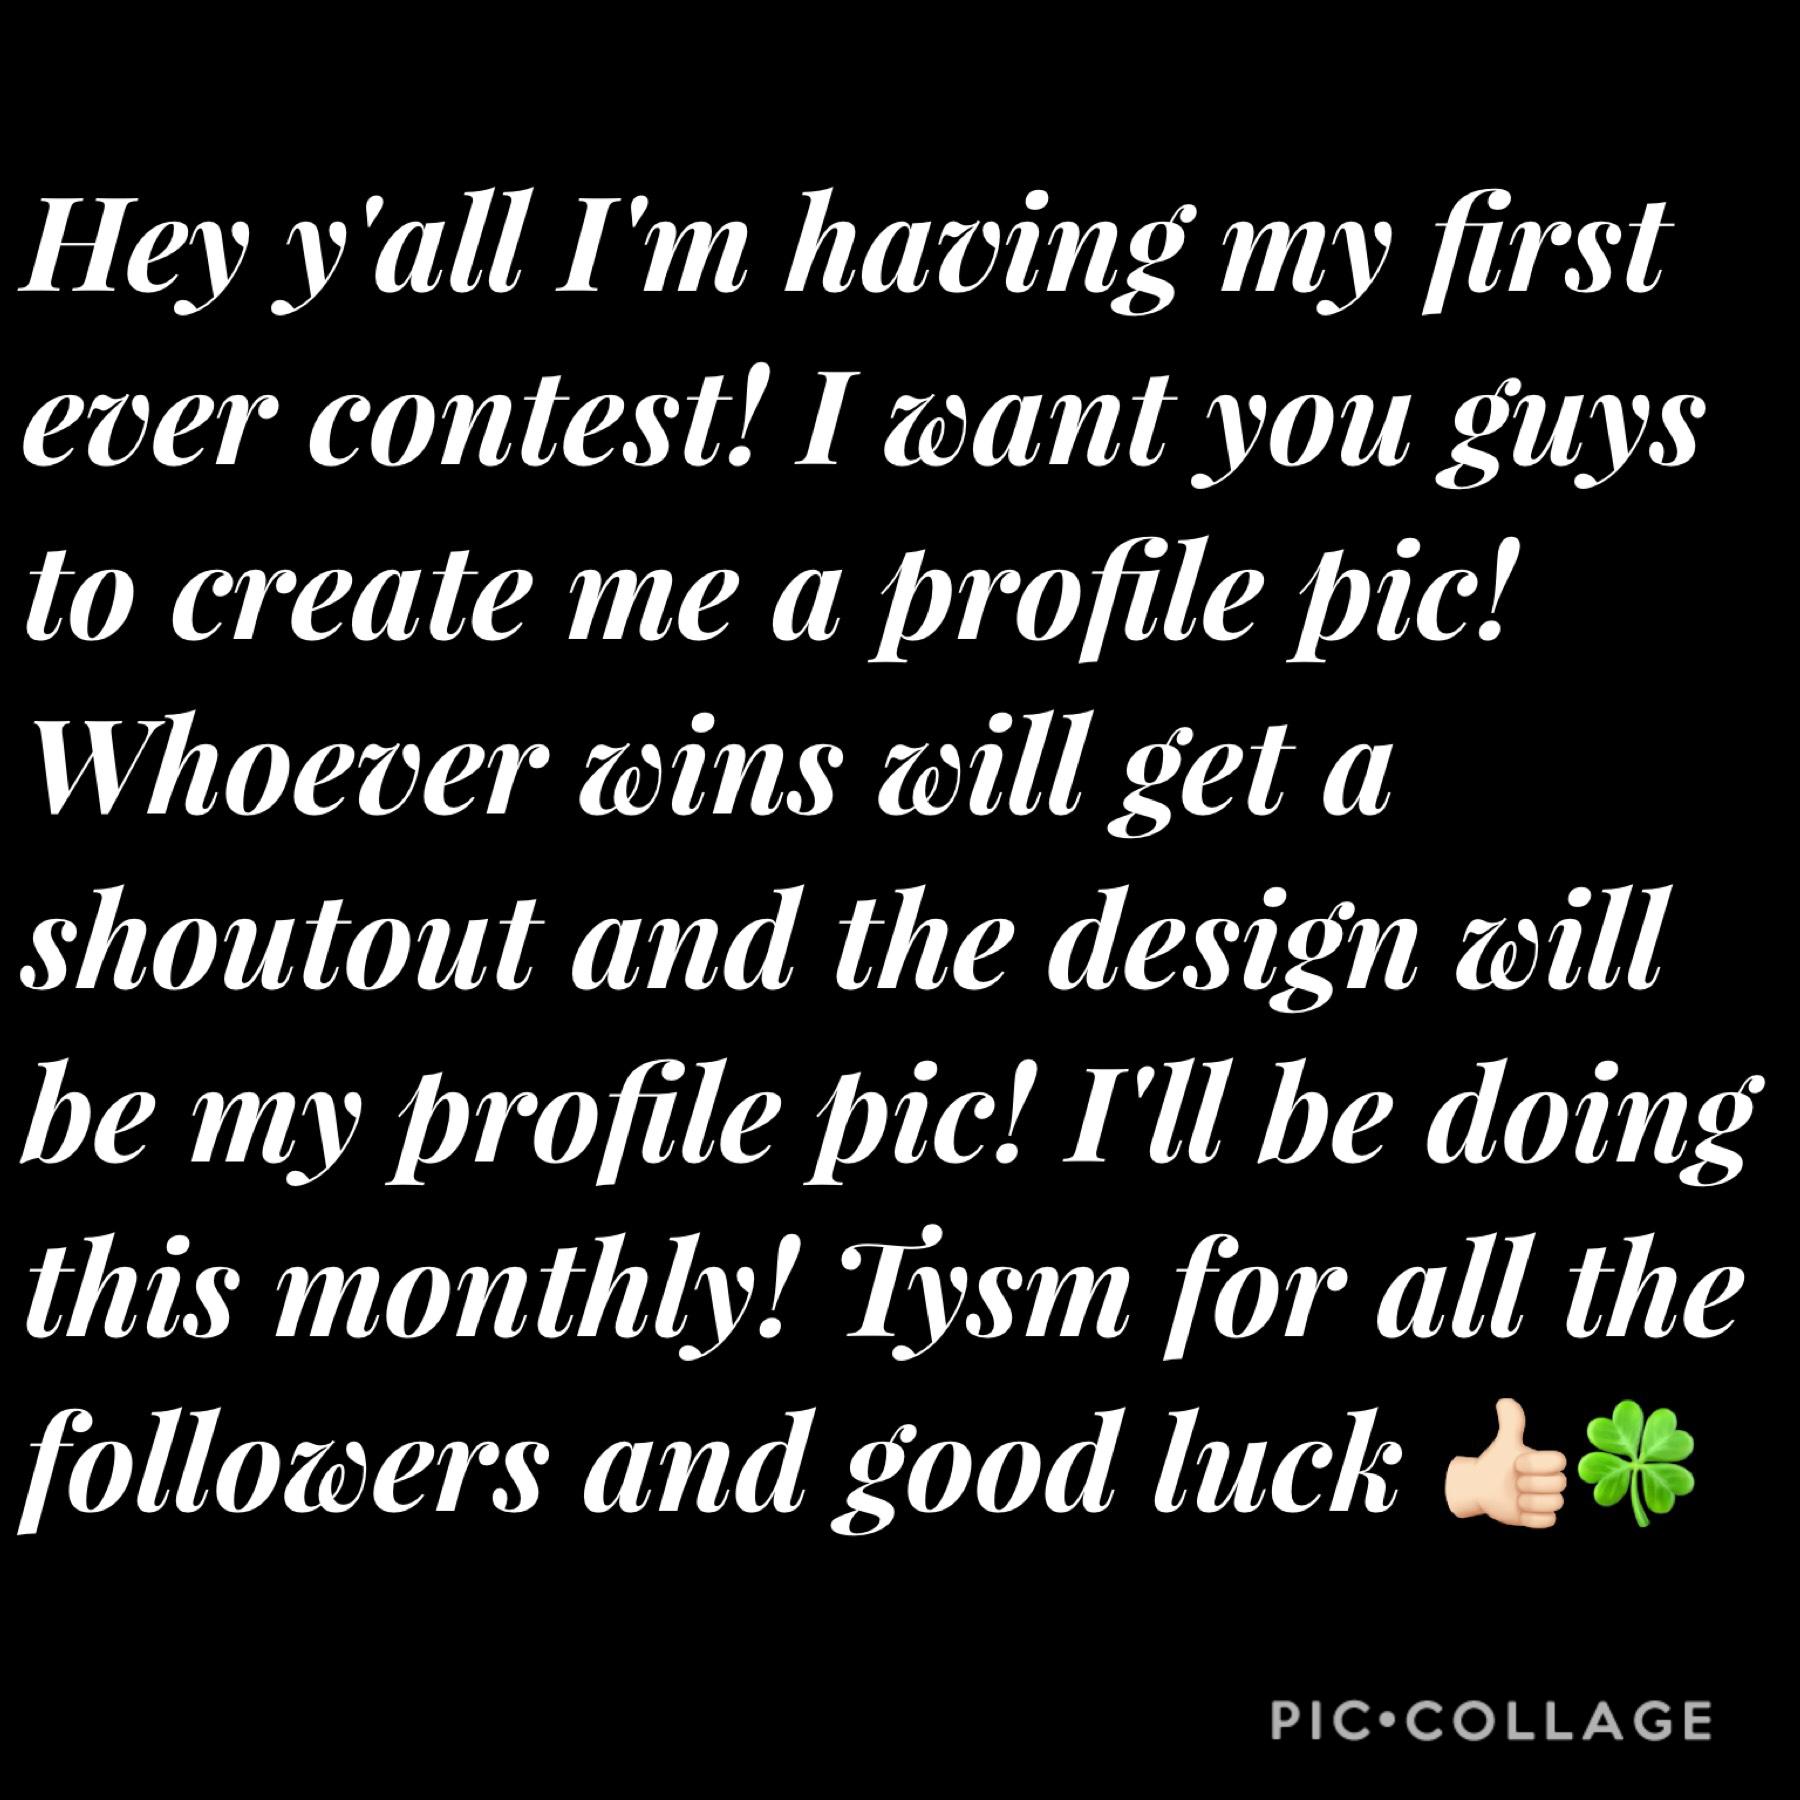 My contest hope you win 😉 